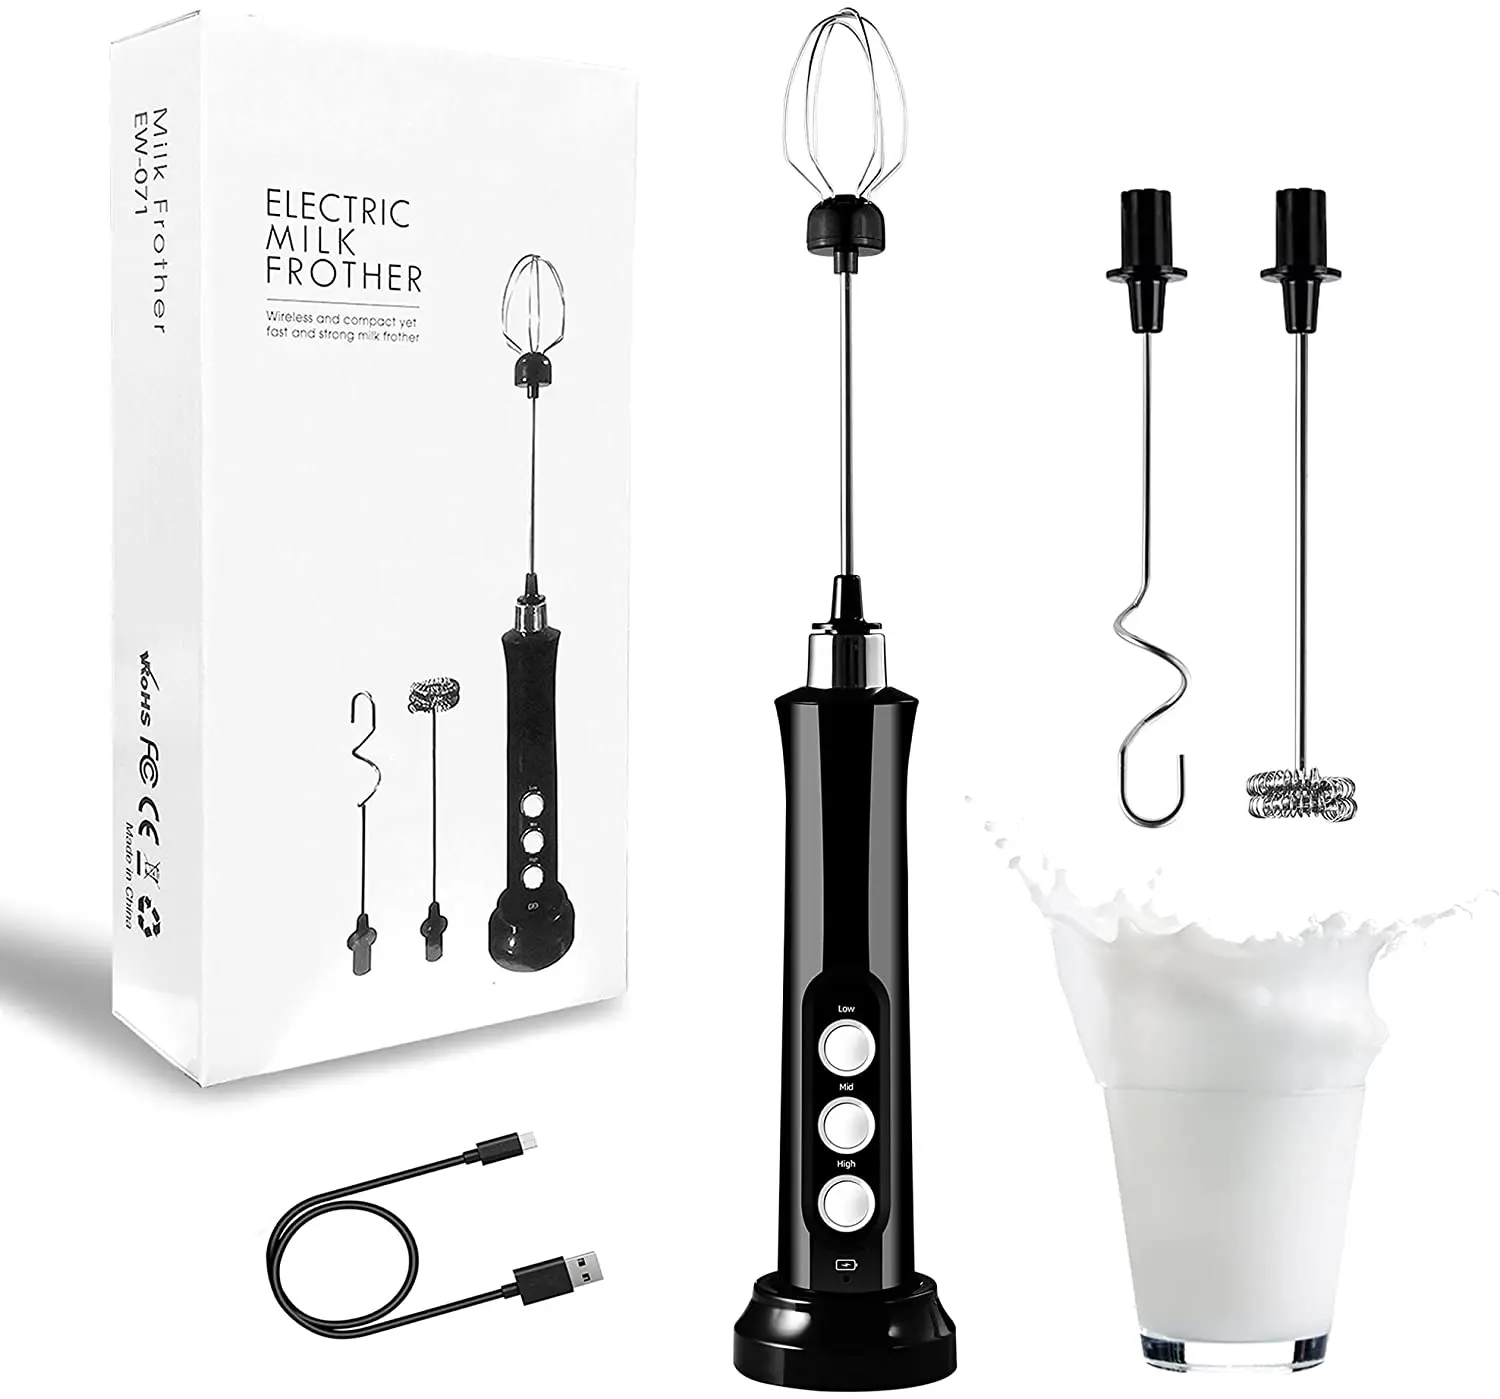 

amazon top seller hand operated usb rechargeable electric milk frother 2021, White & black